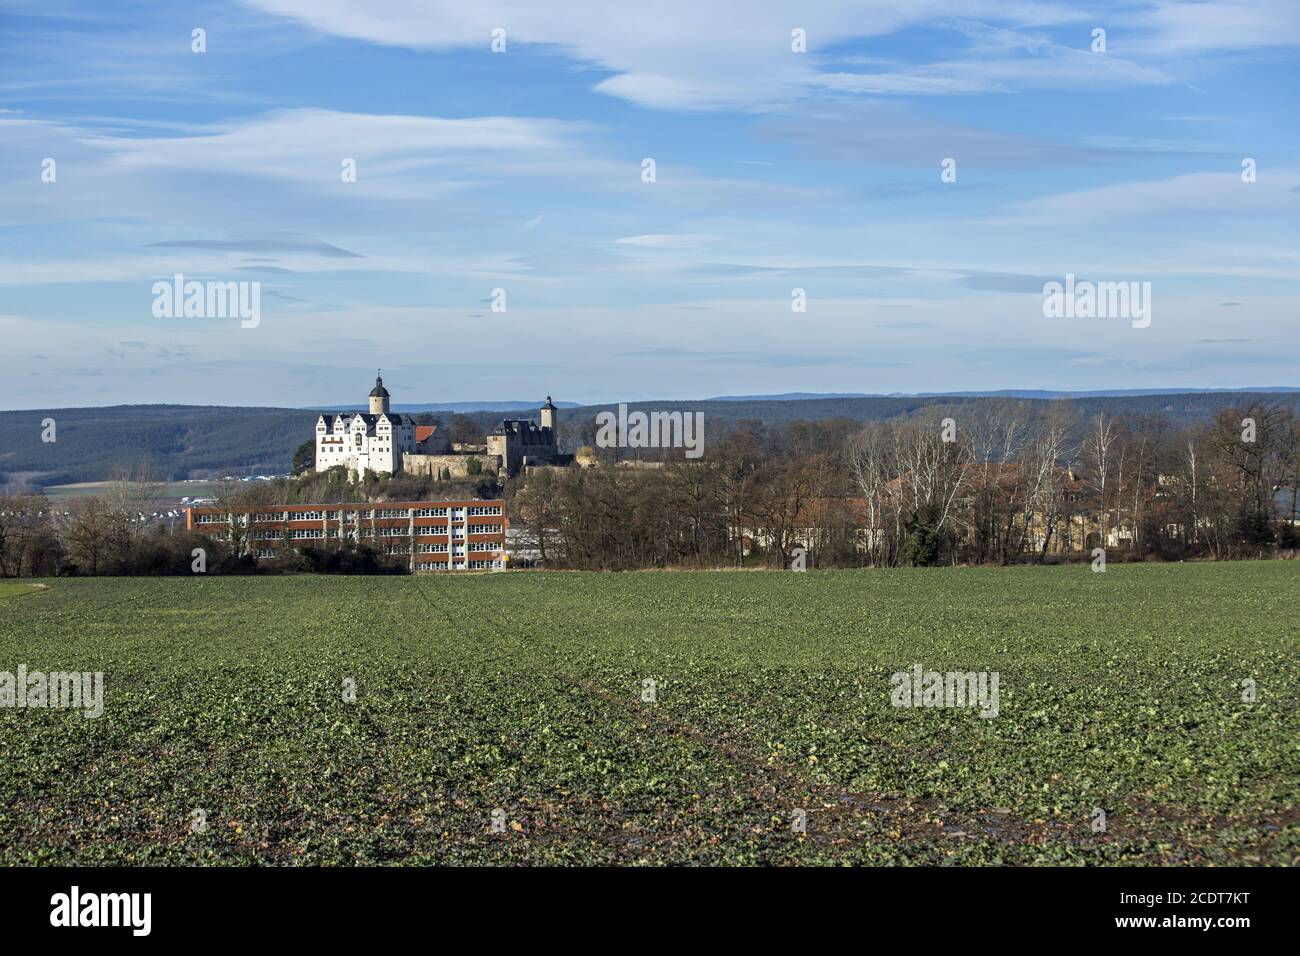 Burg Ranis and the school of the city, Saale-Orla-Kreis, Thuringia, Germany, Europe Stock Photo